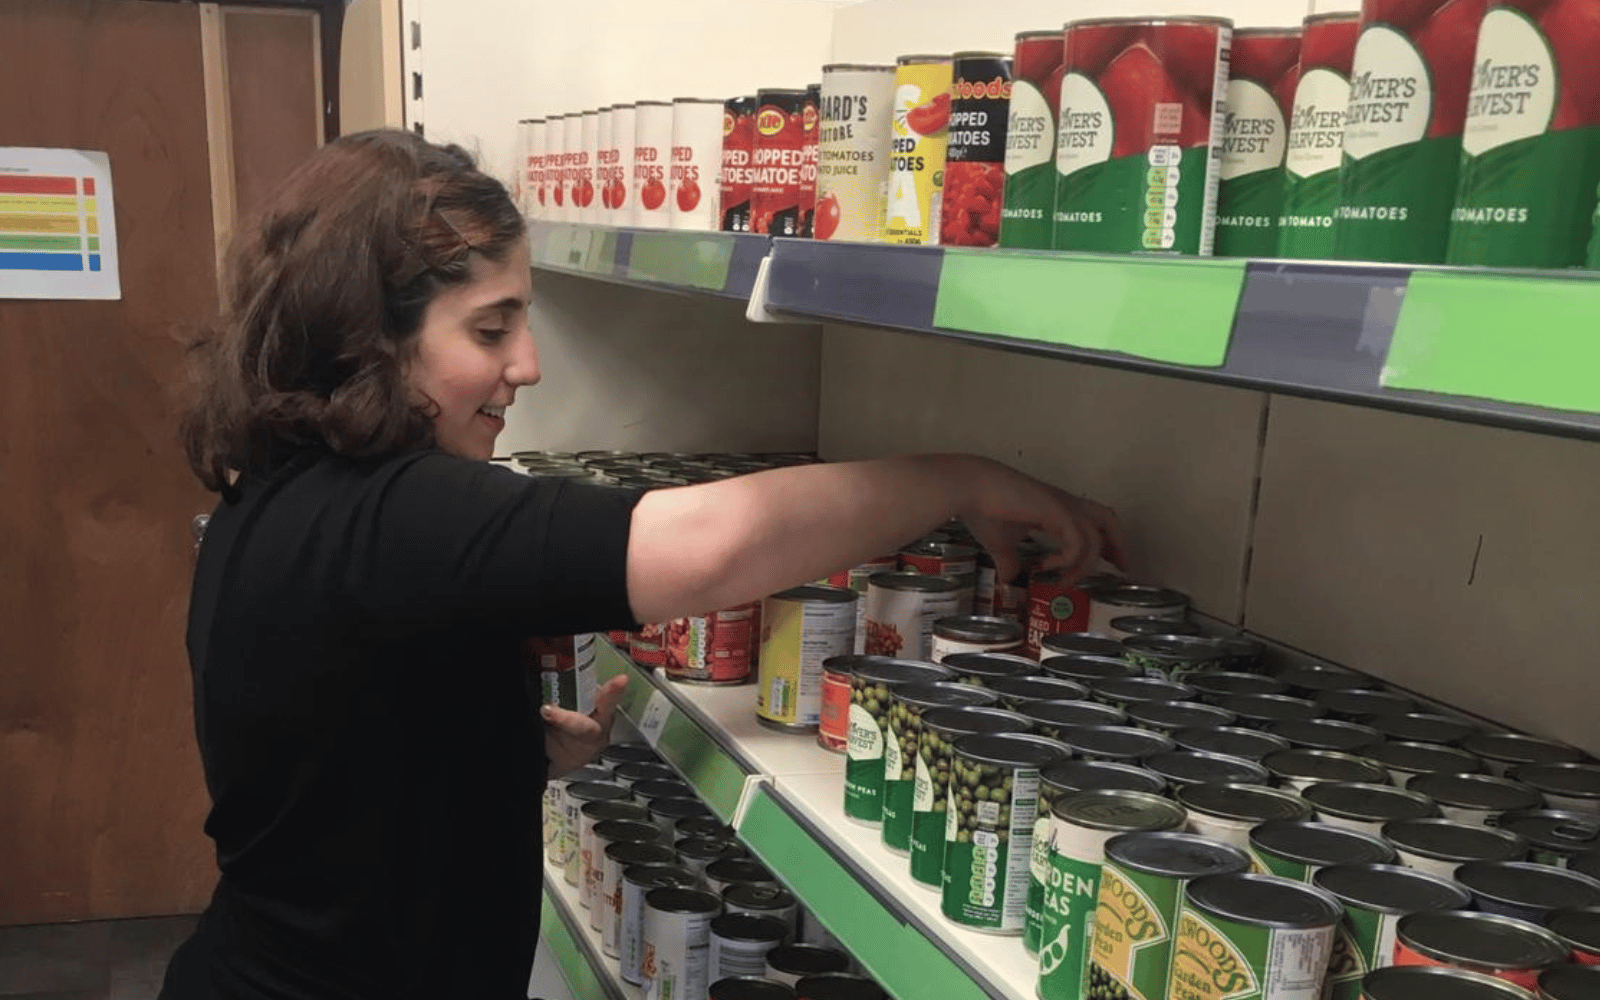 Christina now volunteers at a food pantry run by Greater Pollok Services